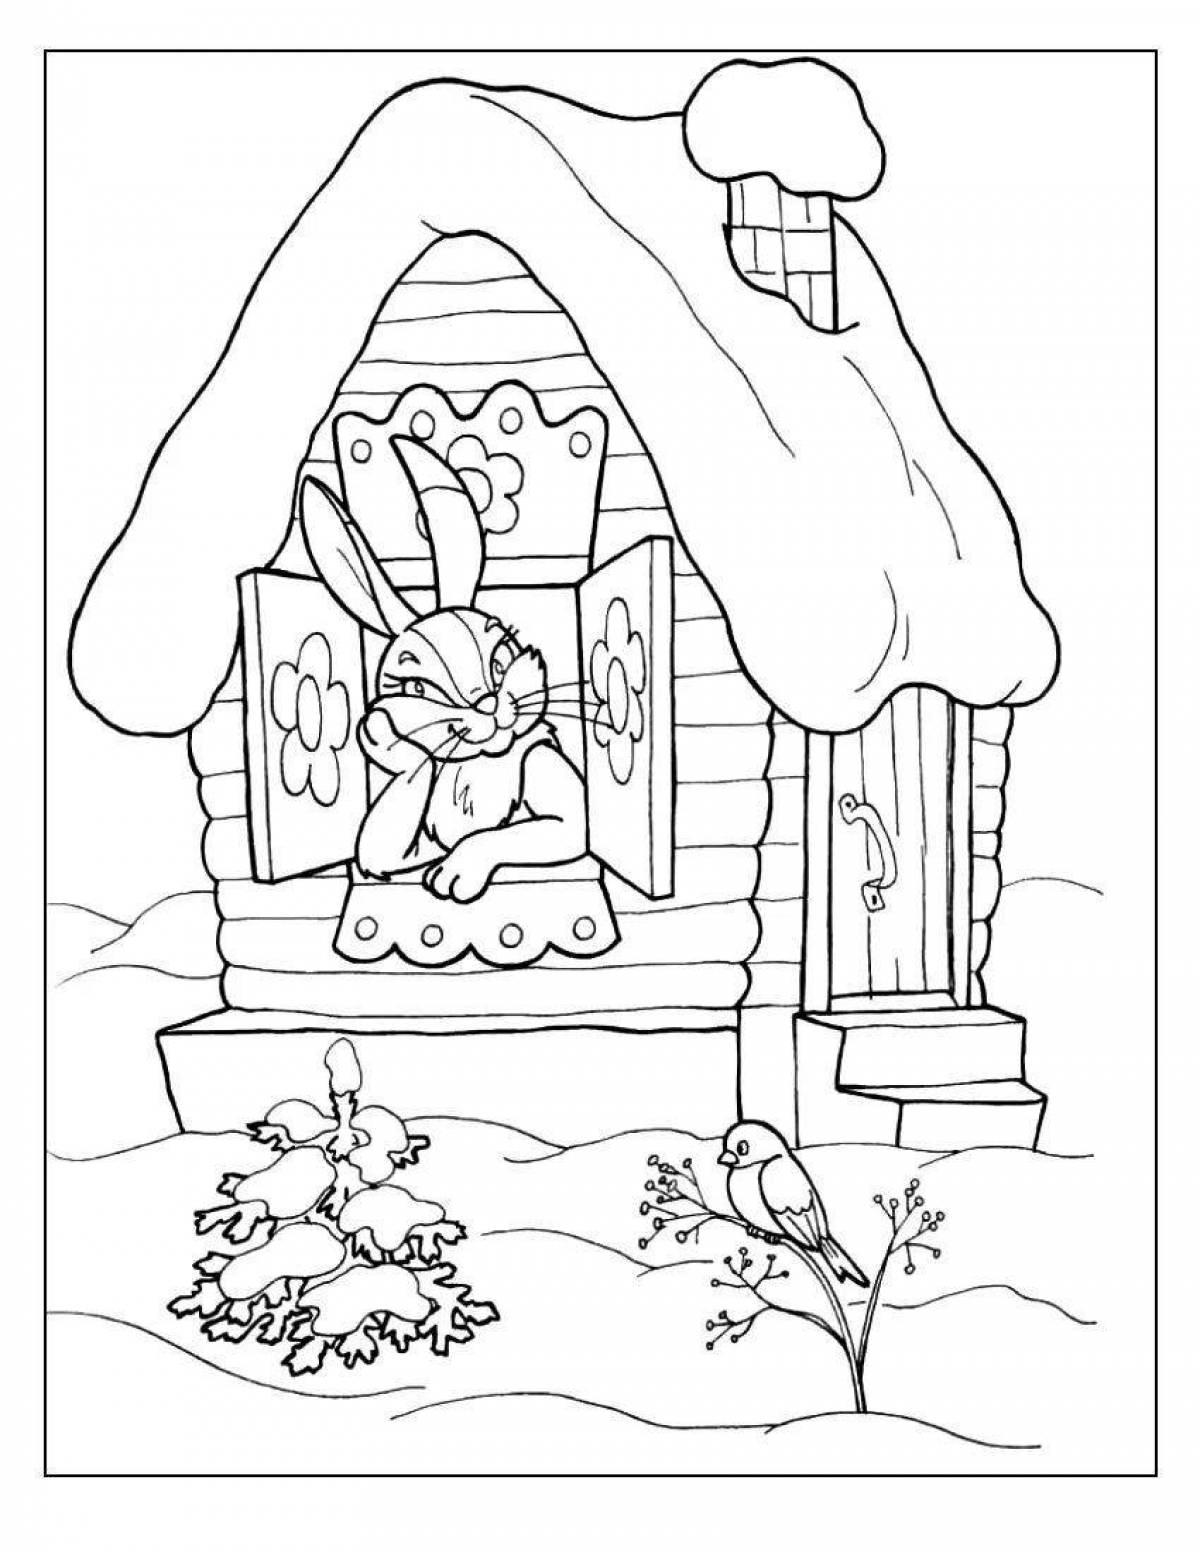 Coloring book playful hare hut